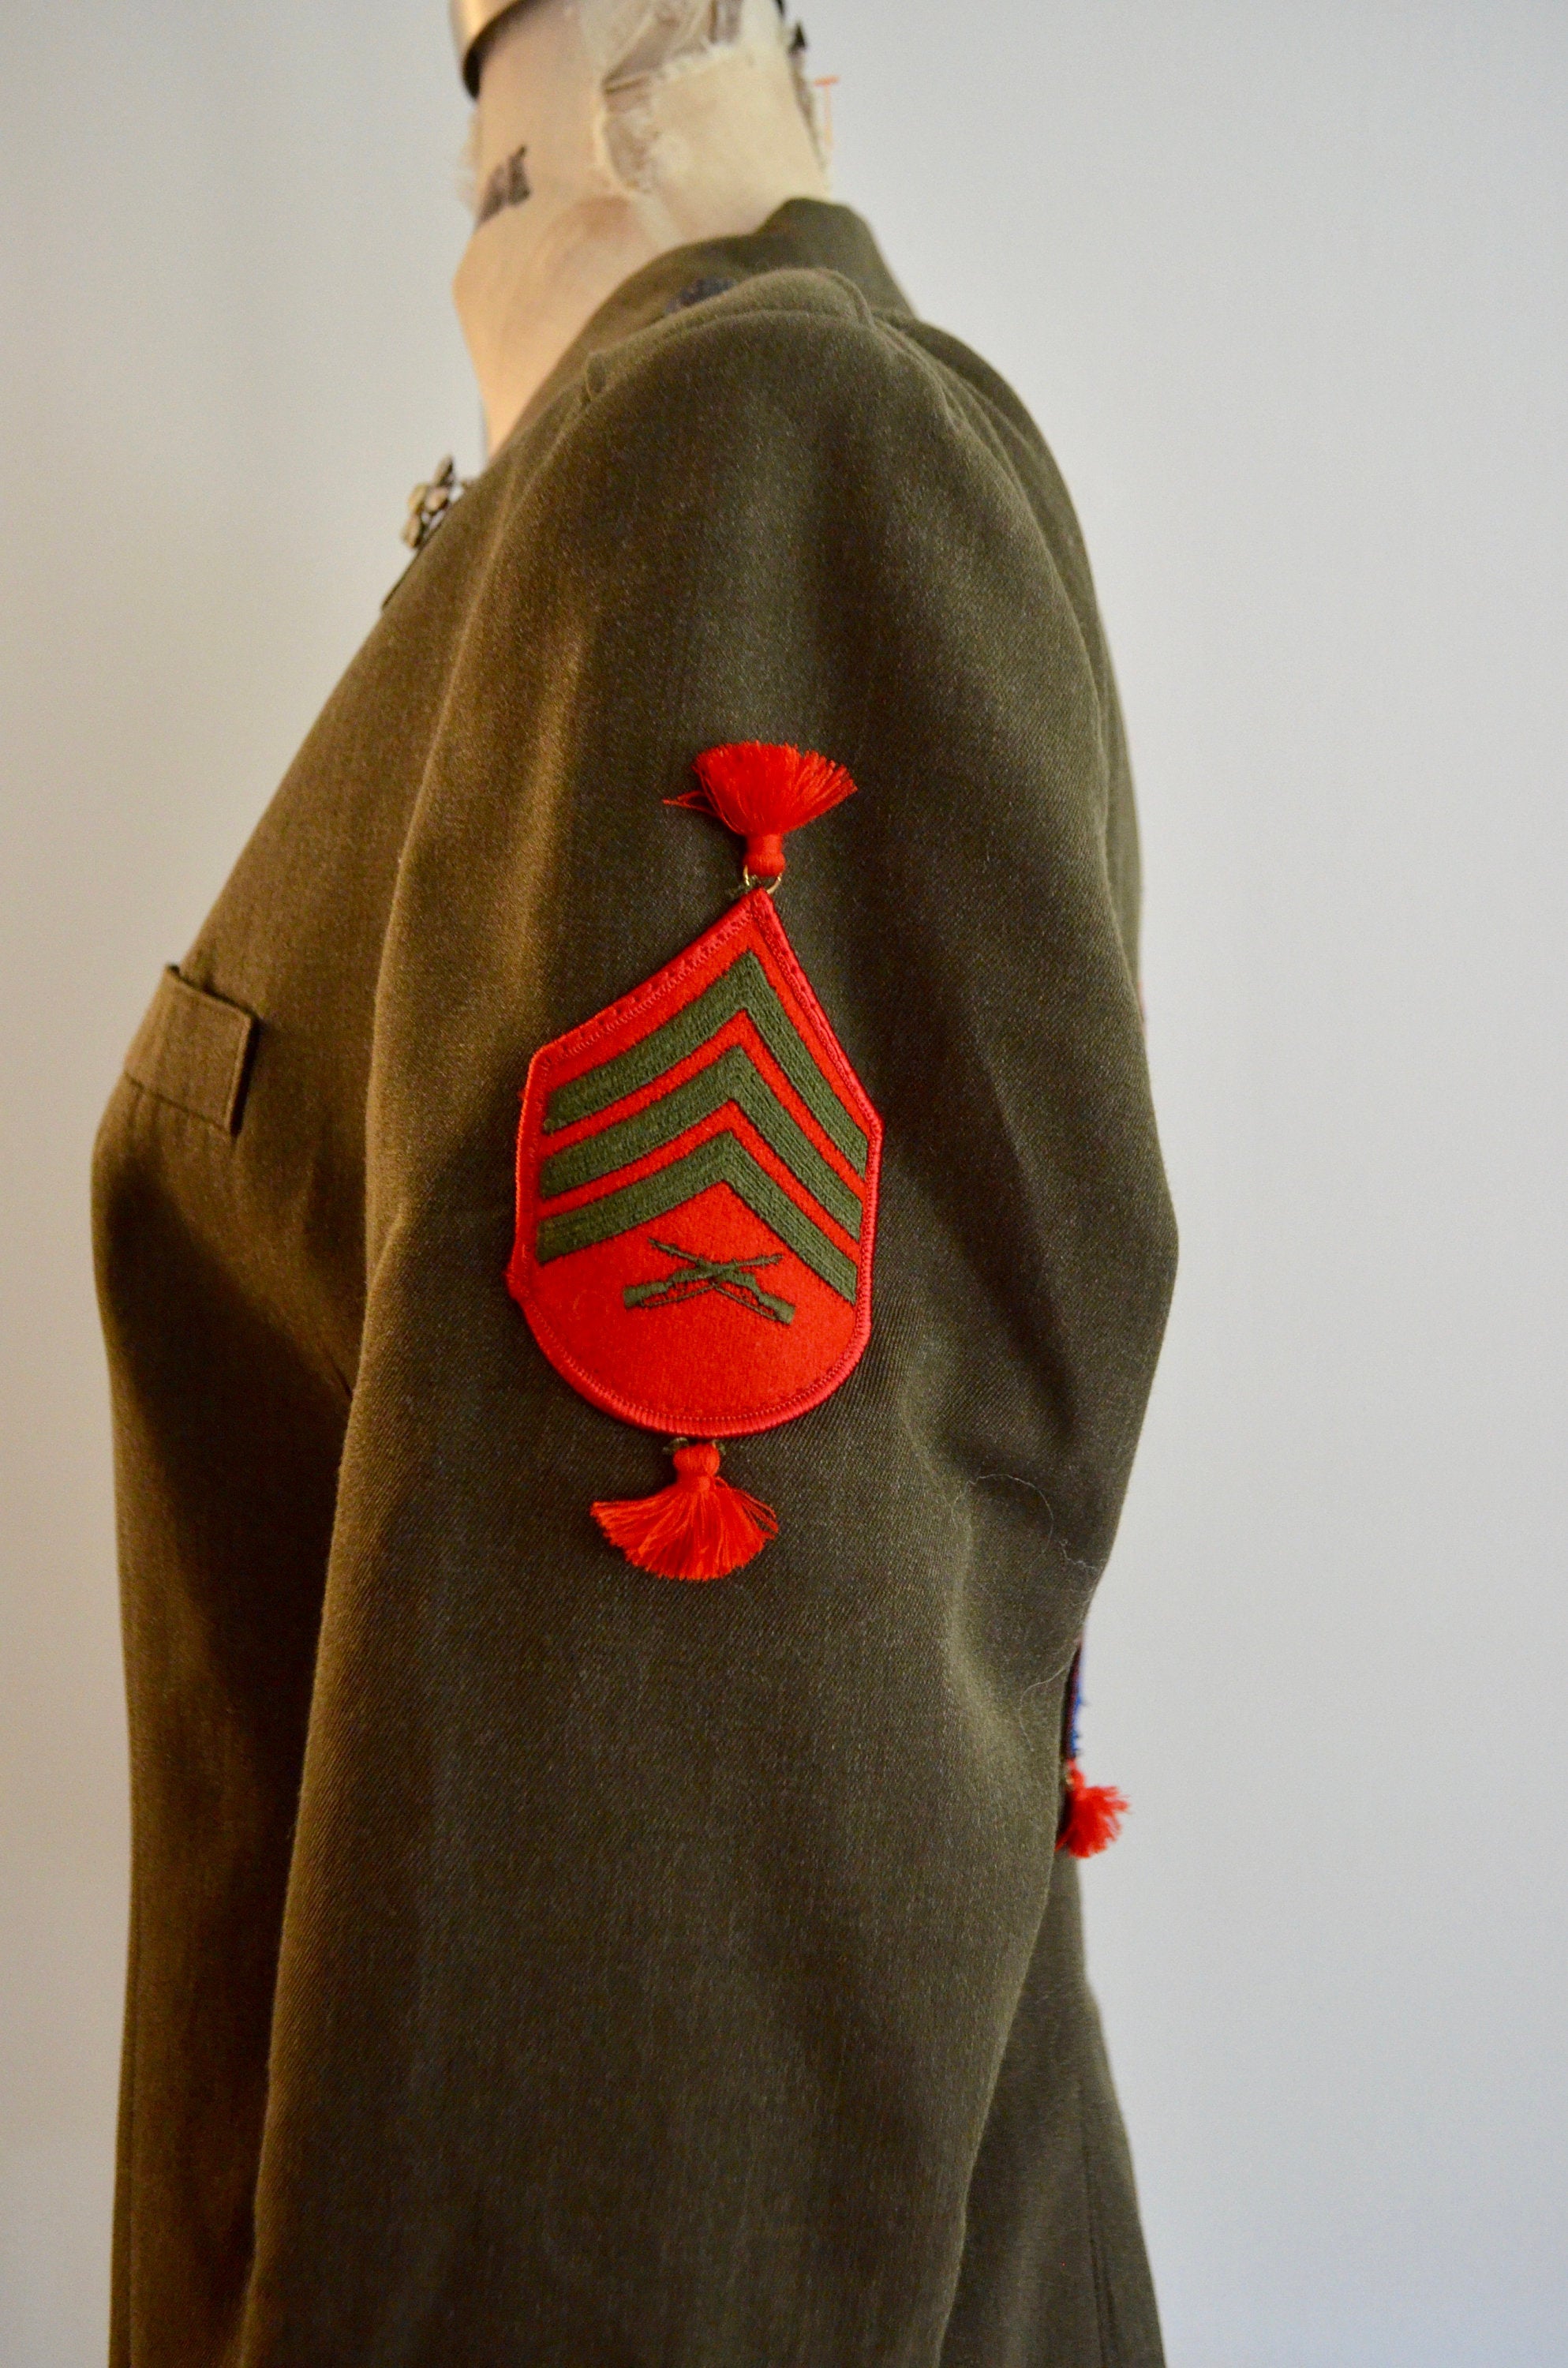 New Old Stock Reworked Formal Genuine Army Military Woman Dress Coat Blazer W Patched Gg And Tassels